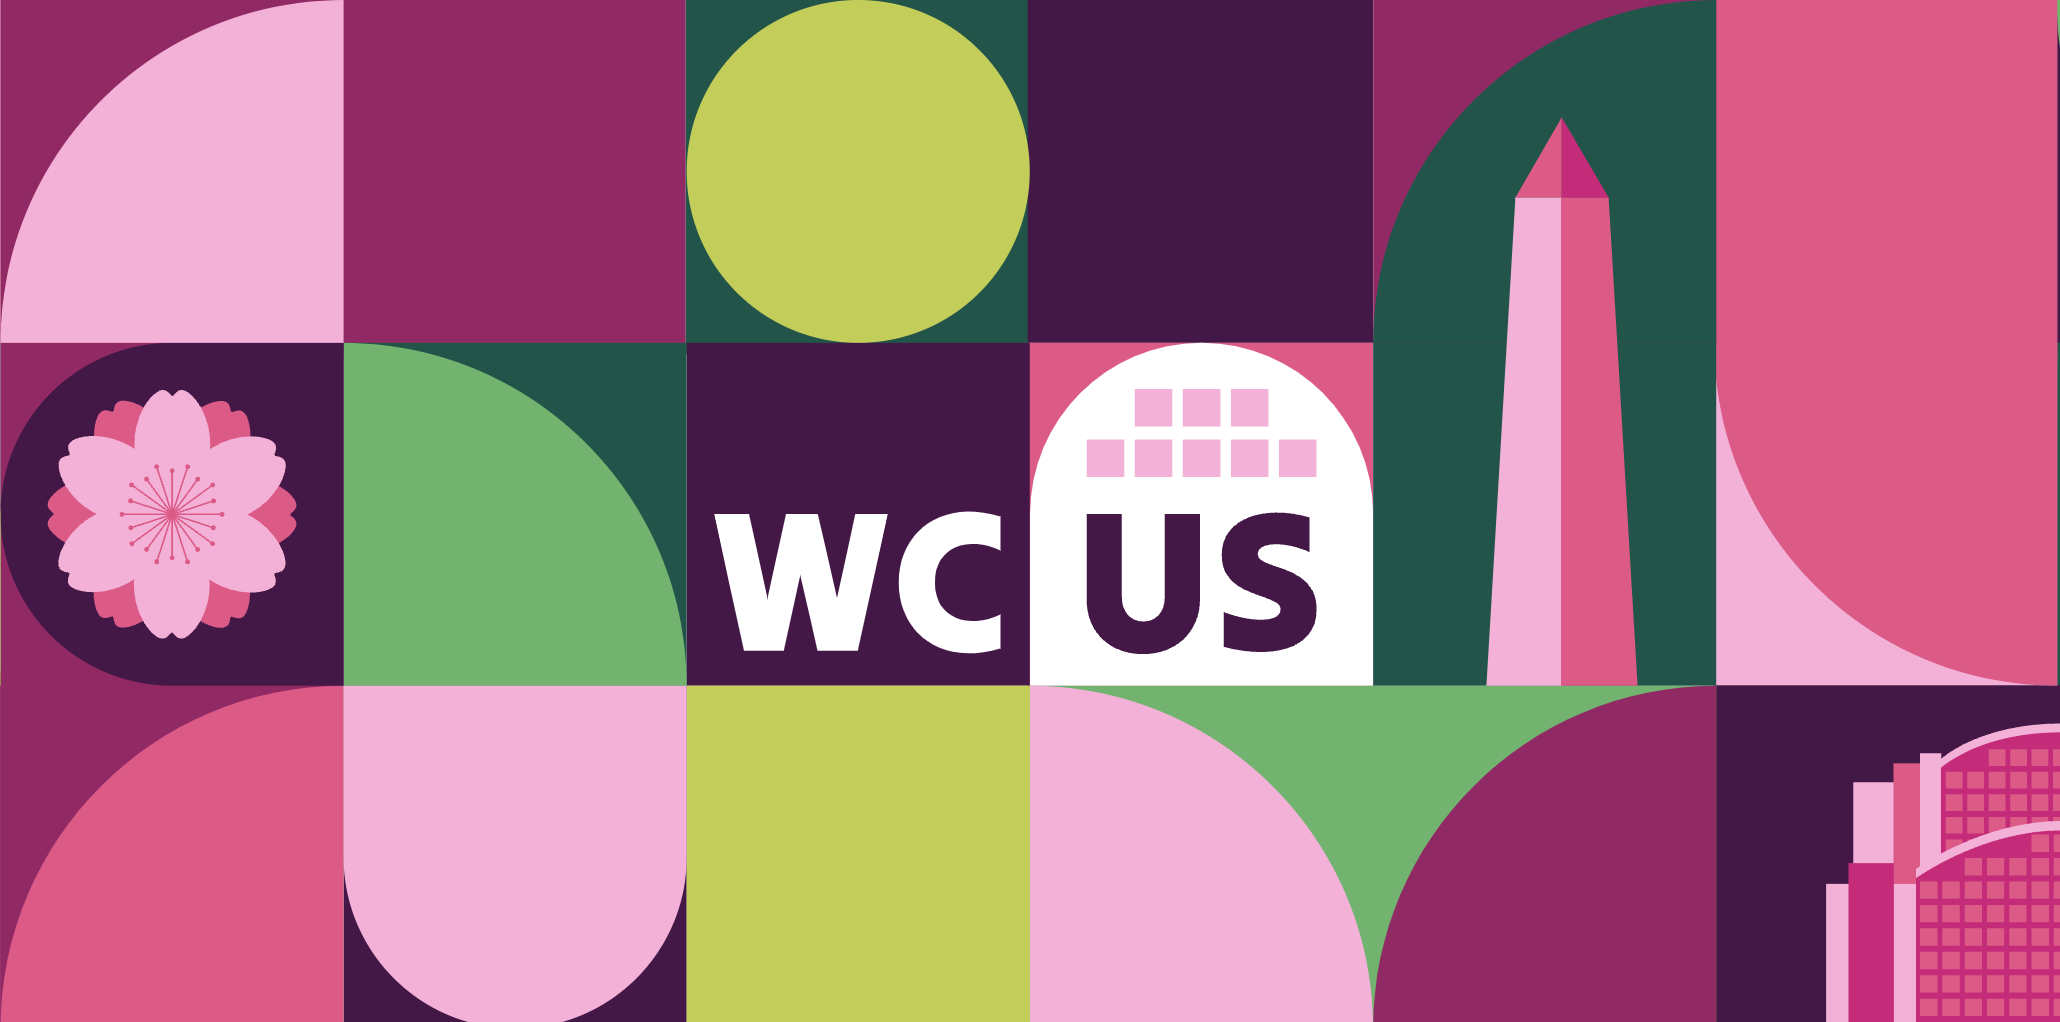 The 2023 WordCamp US logo in a collage of decorative shapes and colors.